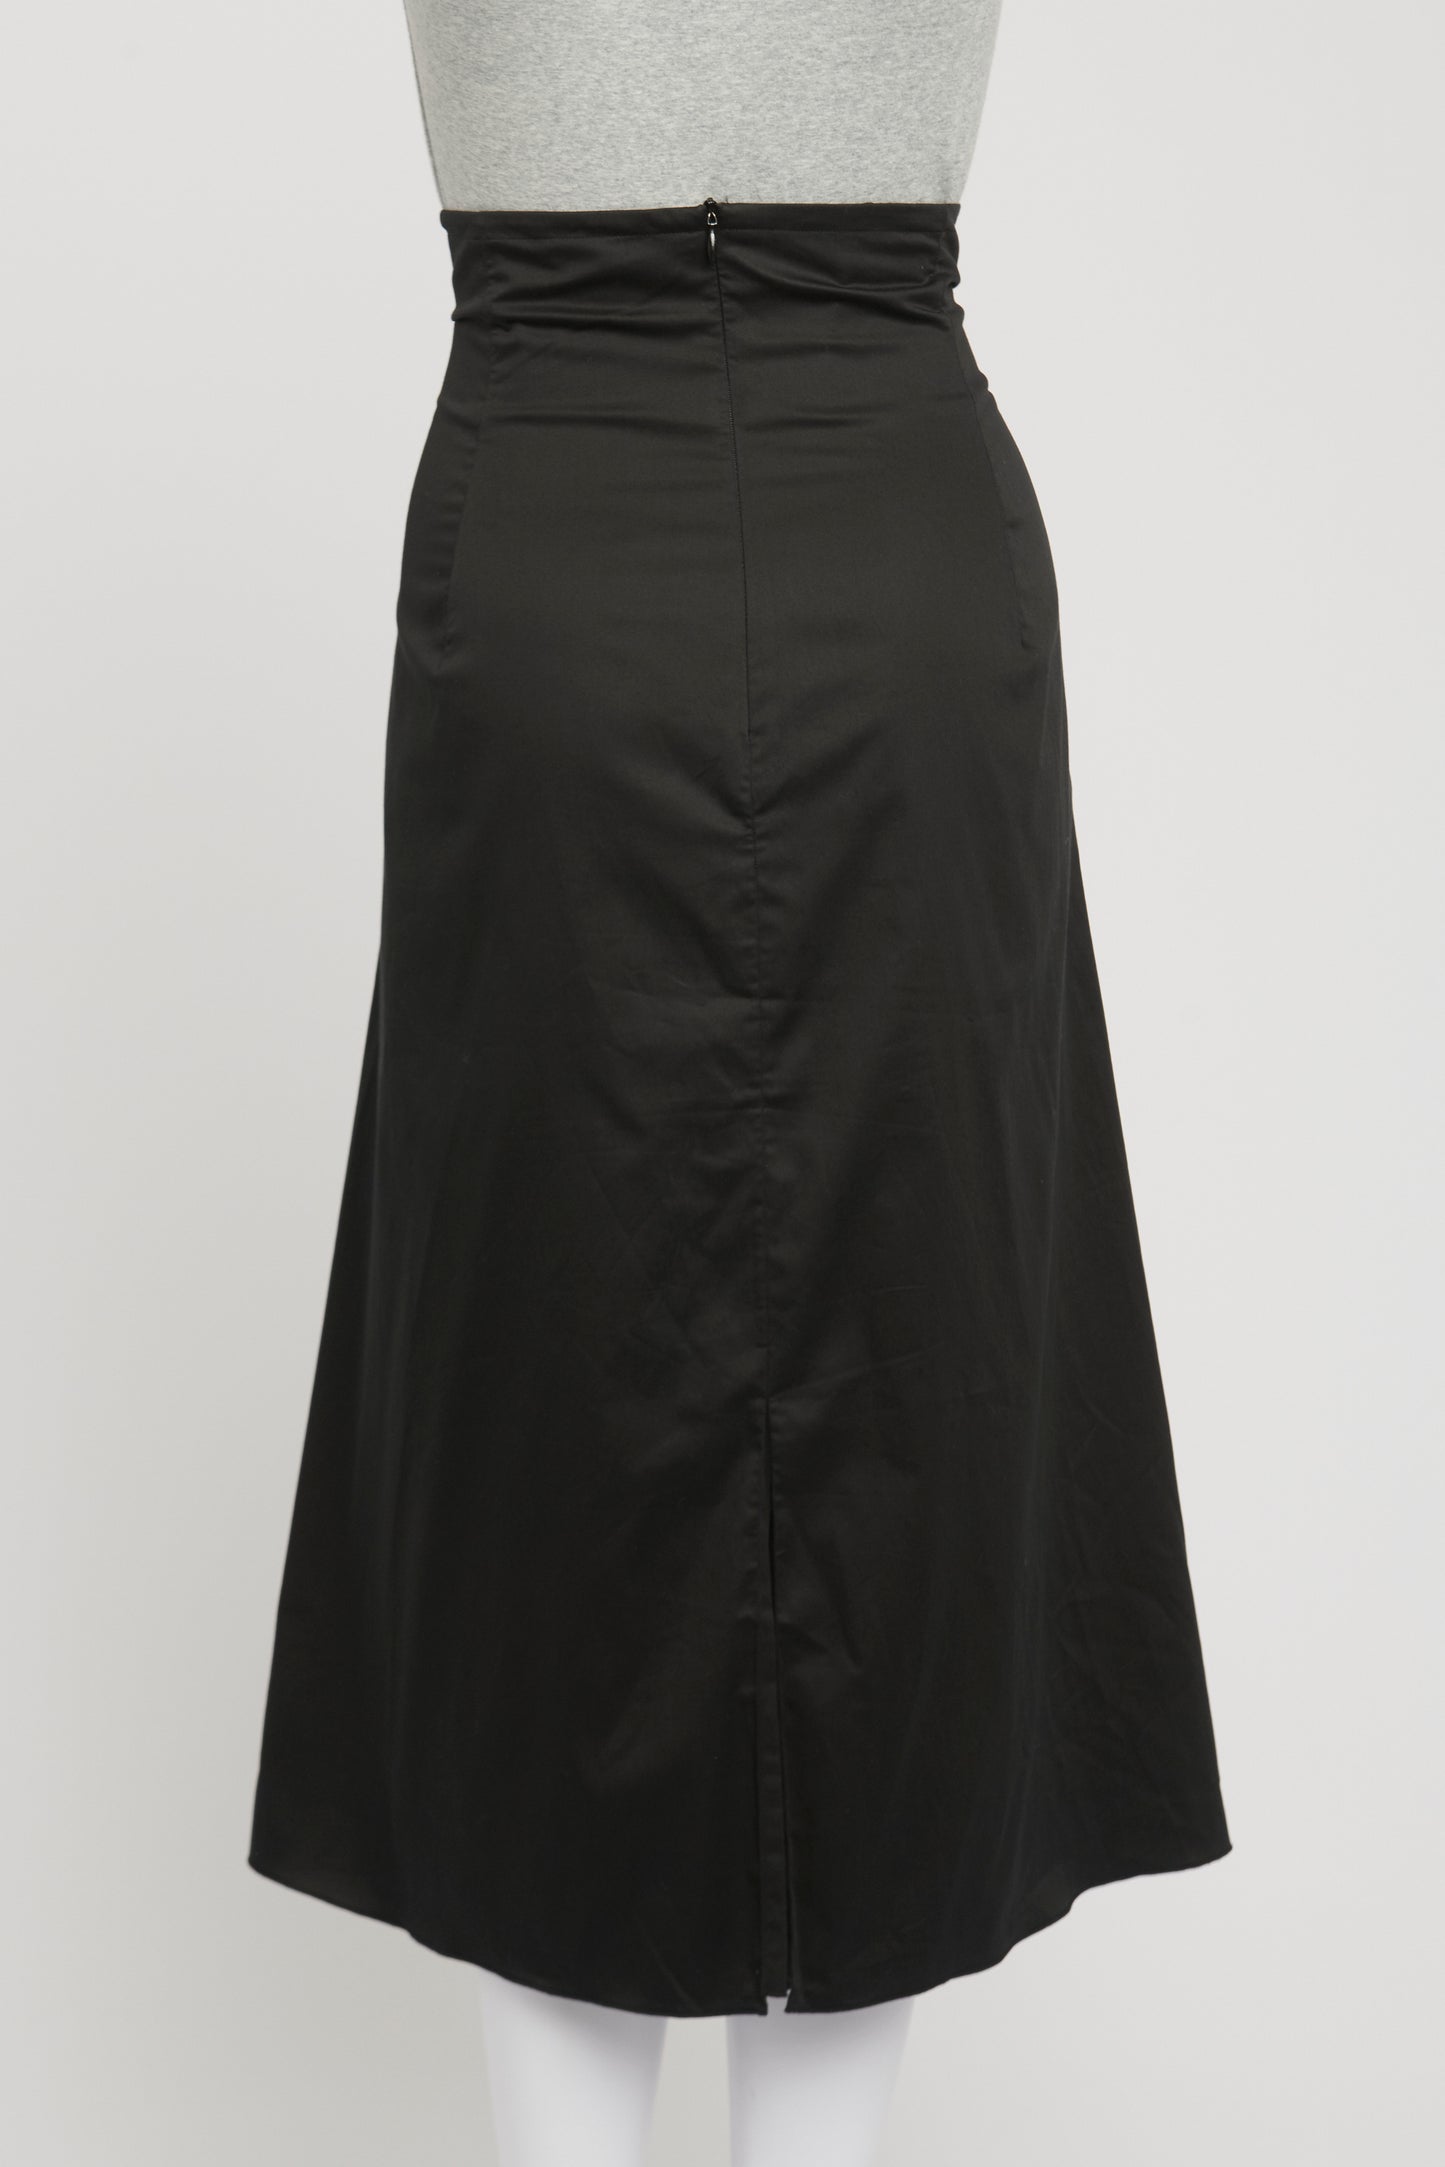 Black Cotton Blend Preowned Lace Up Midi Skirt